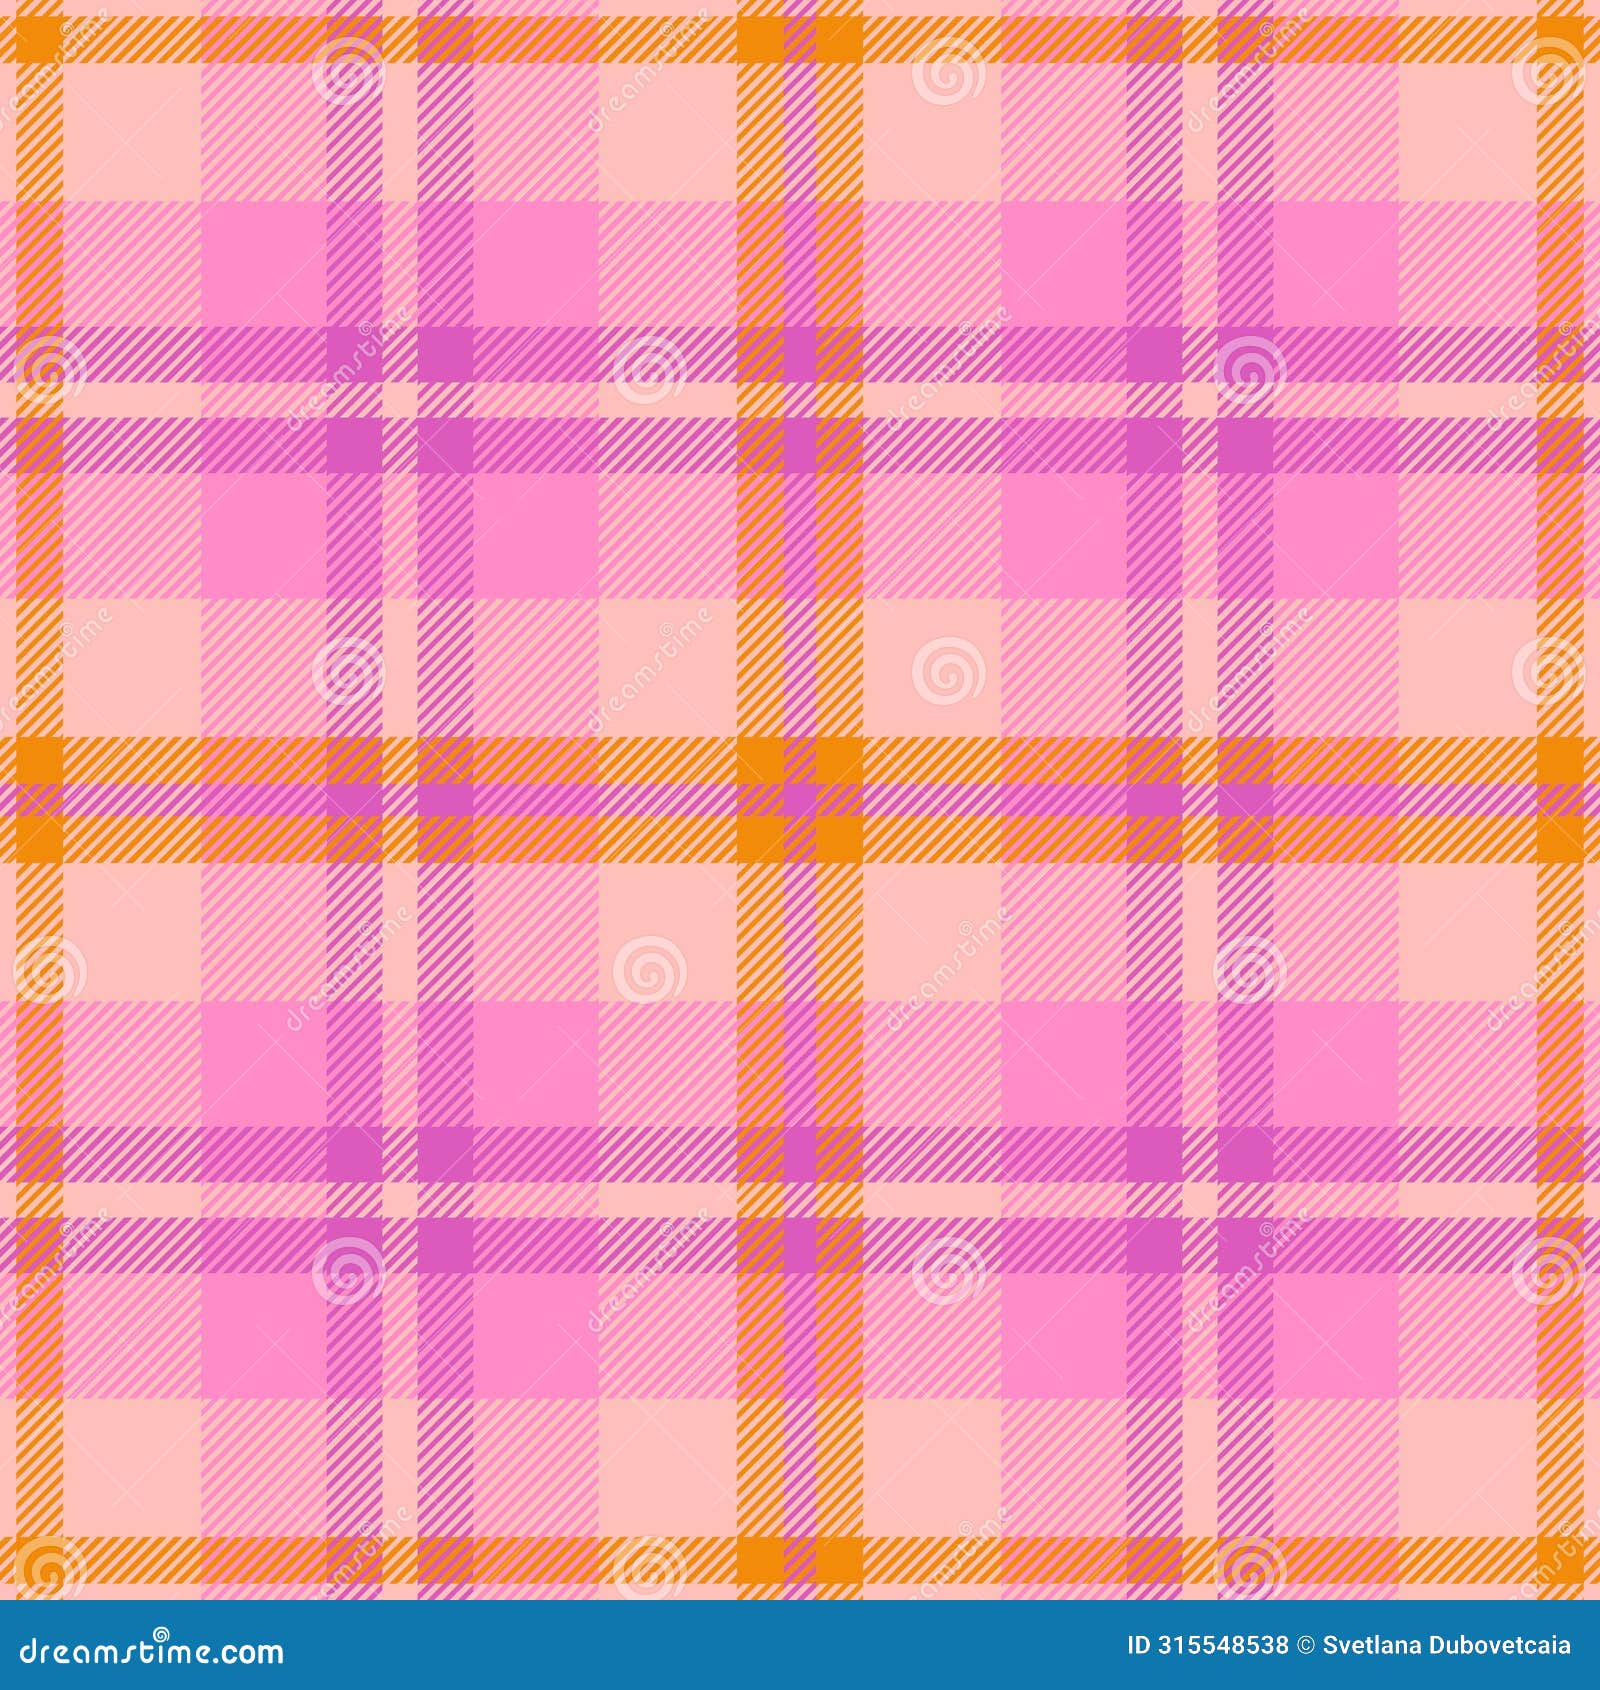 plaid seamless pattern. check pink color. repeating tartan checks . repeated scottish fall flannel. madras fabric prints